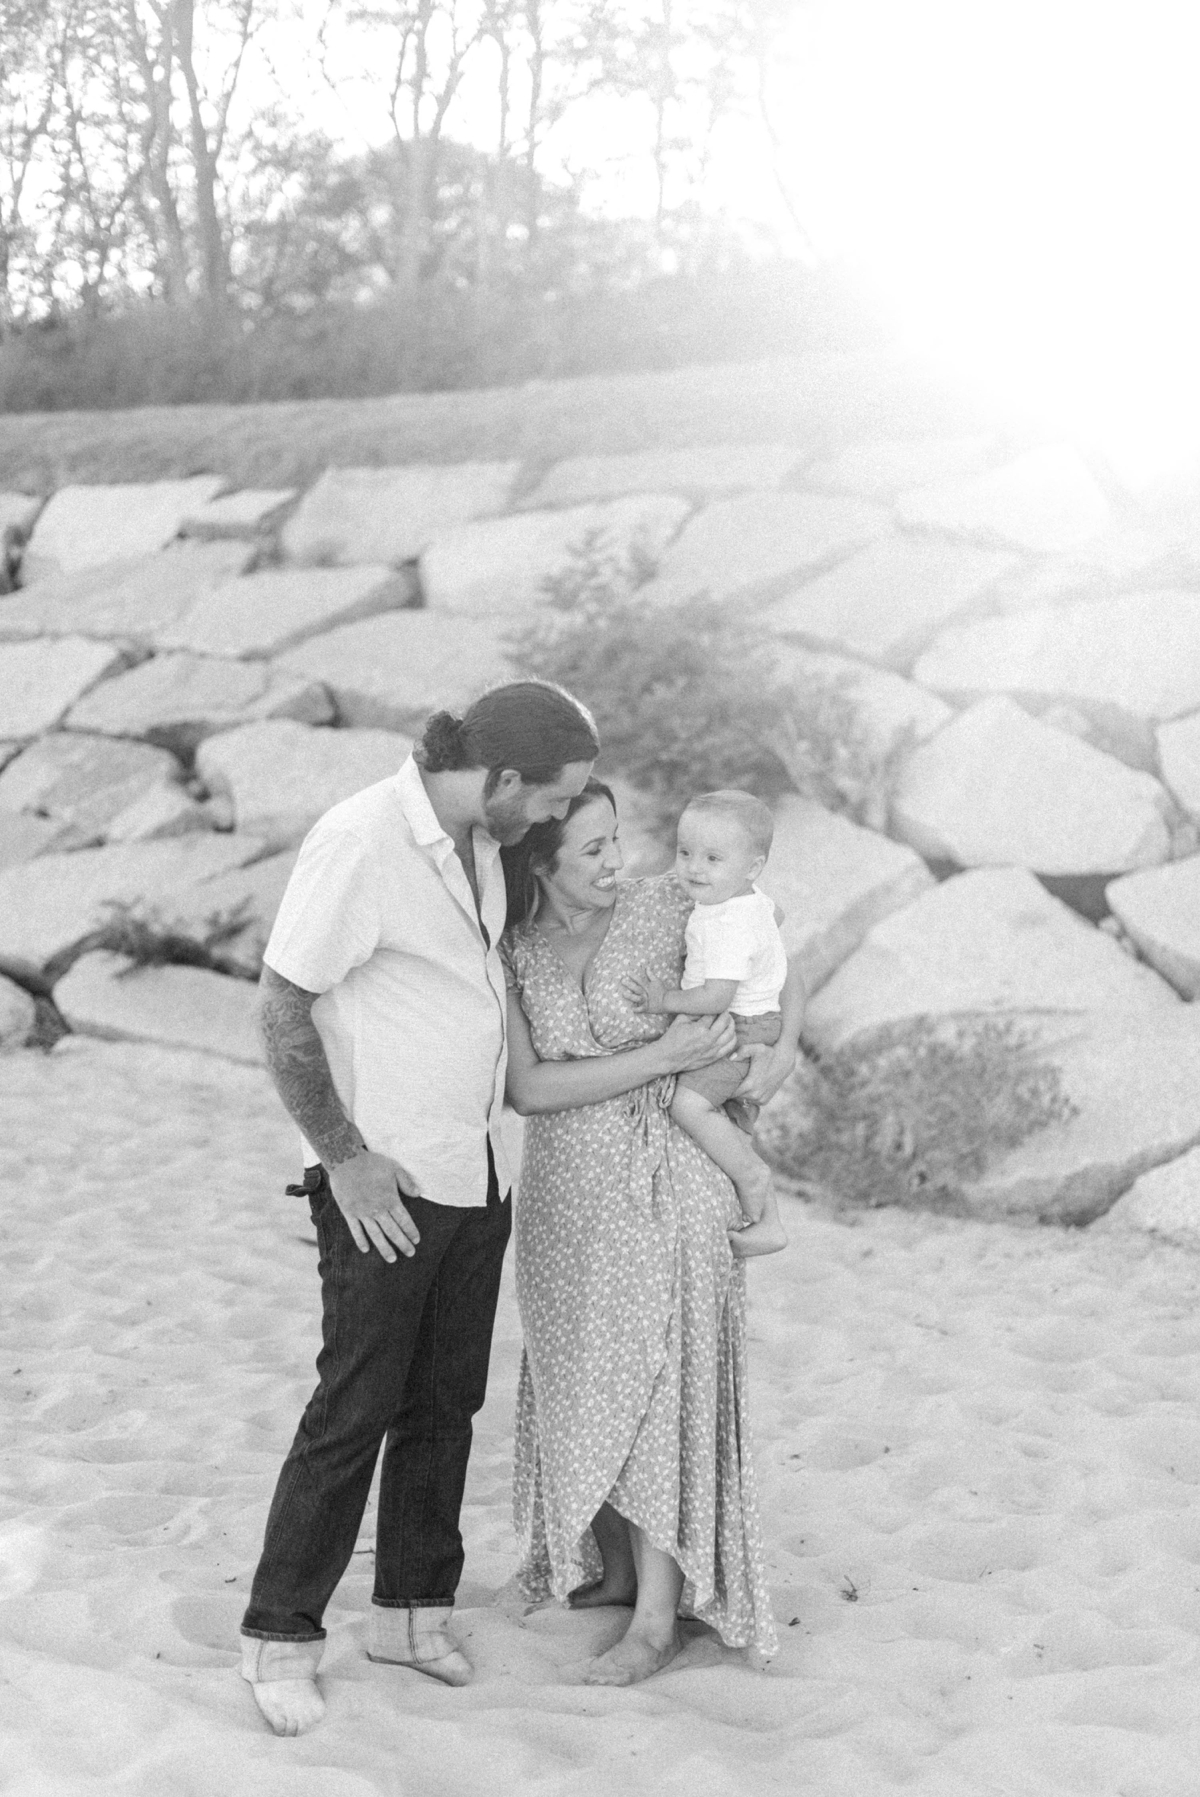 Summer Mini Family Session at Singing Beach in Manchester, MA shot by Boston Photographer Annmarie Swift